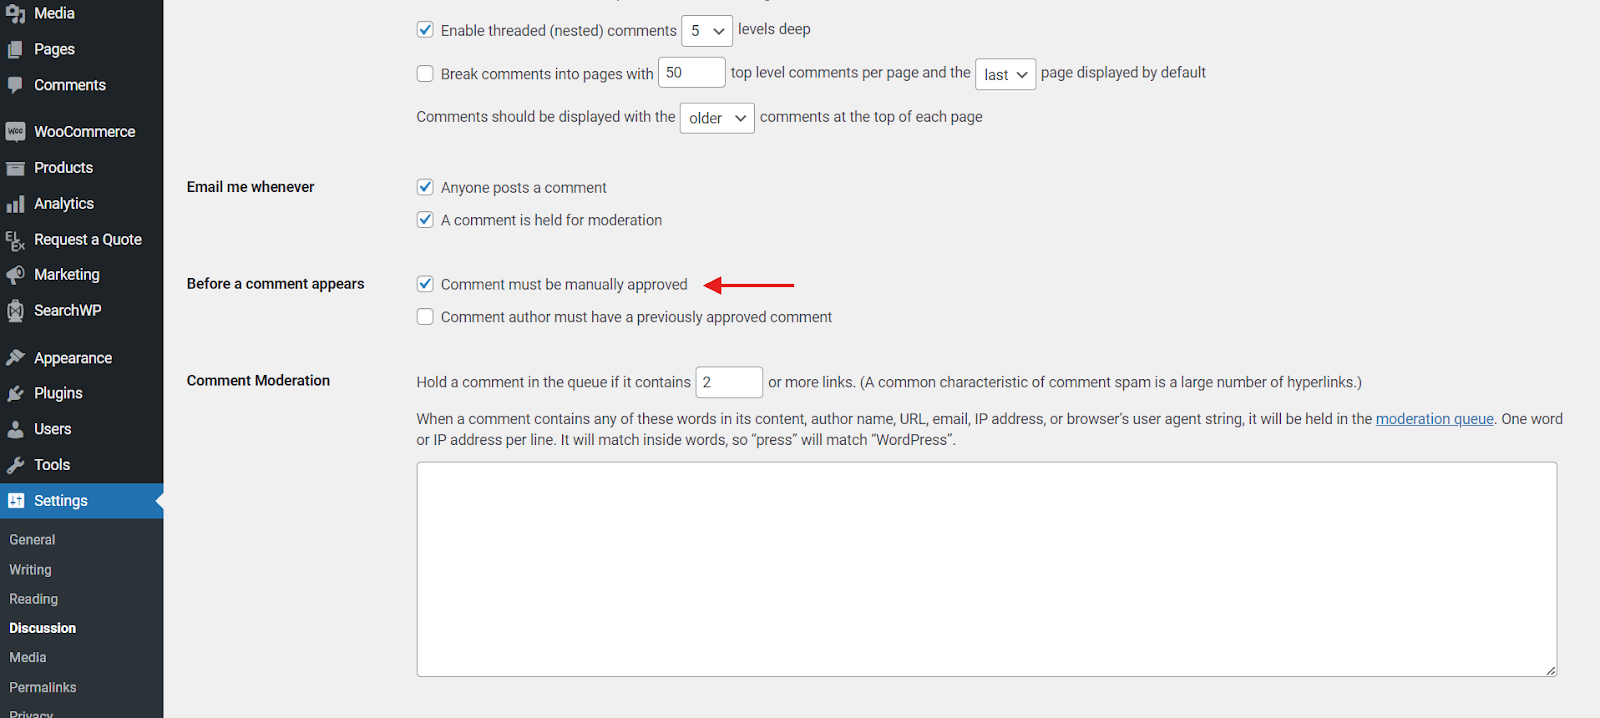 Implement Comment Moderation using the Before a comment appears setting